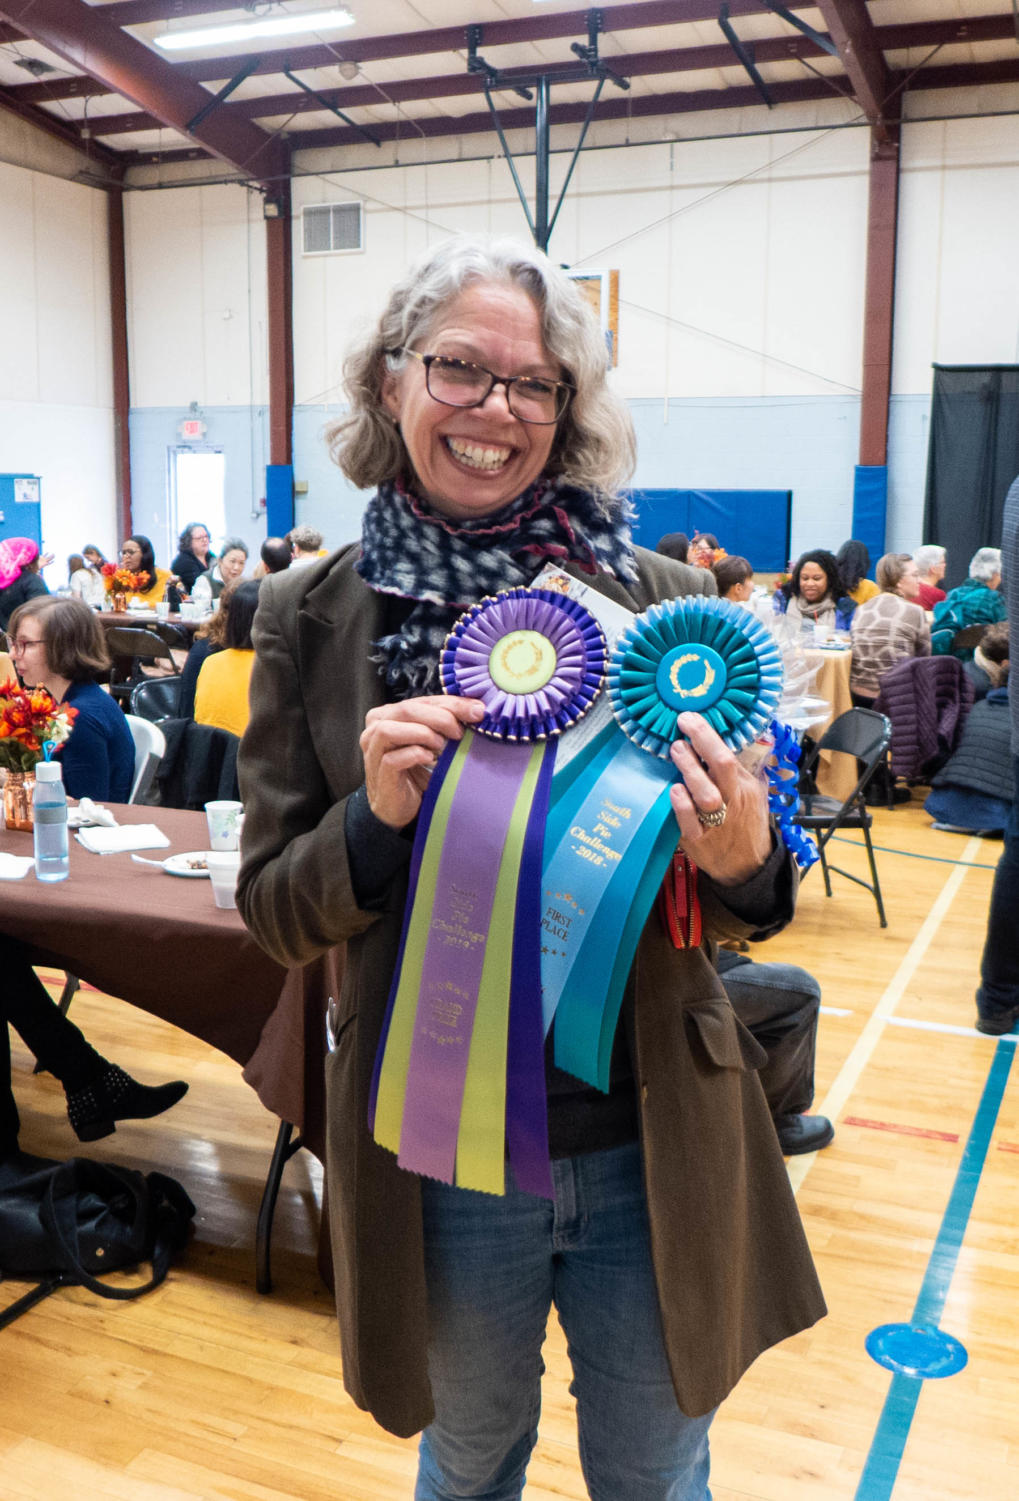 Molly Herron took home the grand prize and category first place titles for her plum pie named “What a good boy am I pie.” Herron has participated in the South Side Pie Challenge every year.